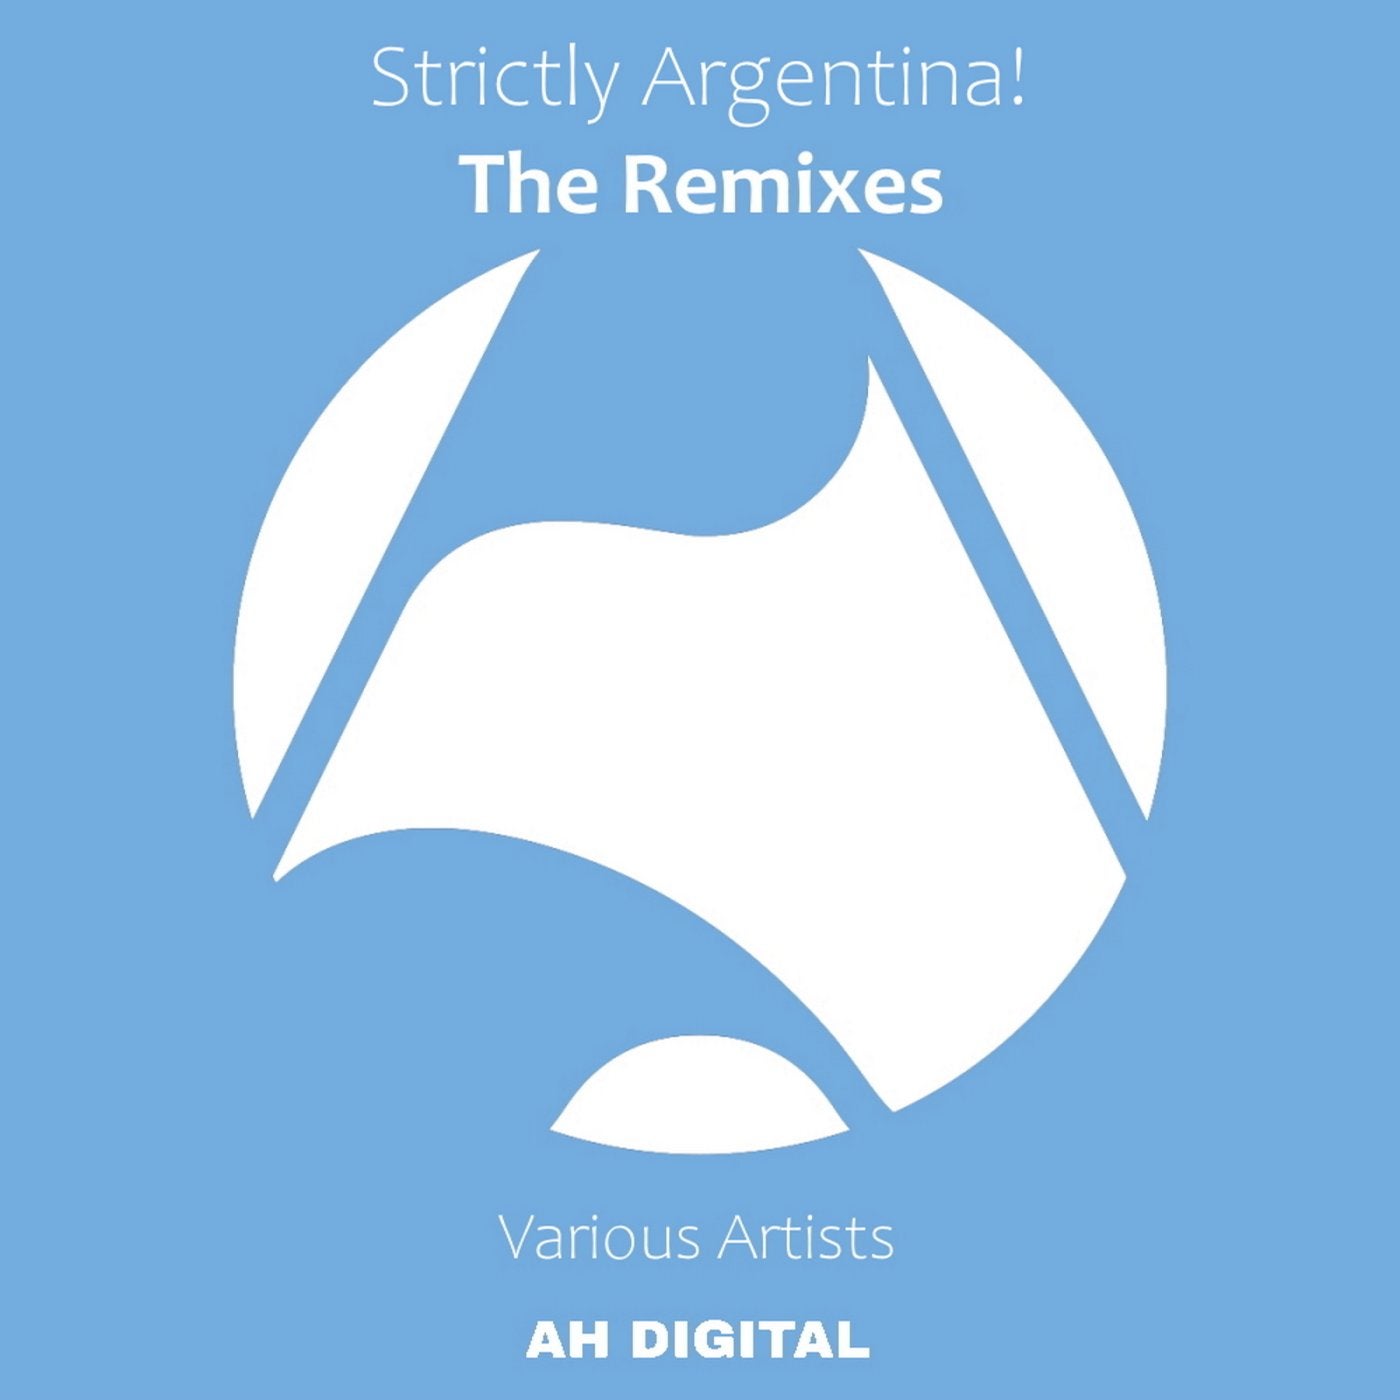 Strictly Argentina! - the Remixes